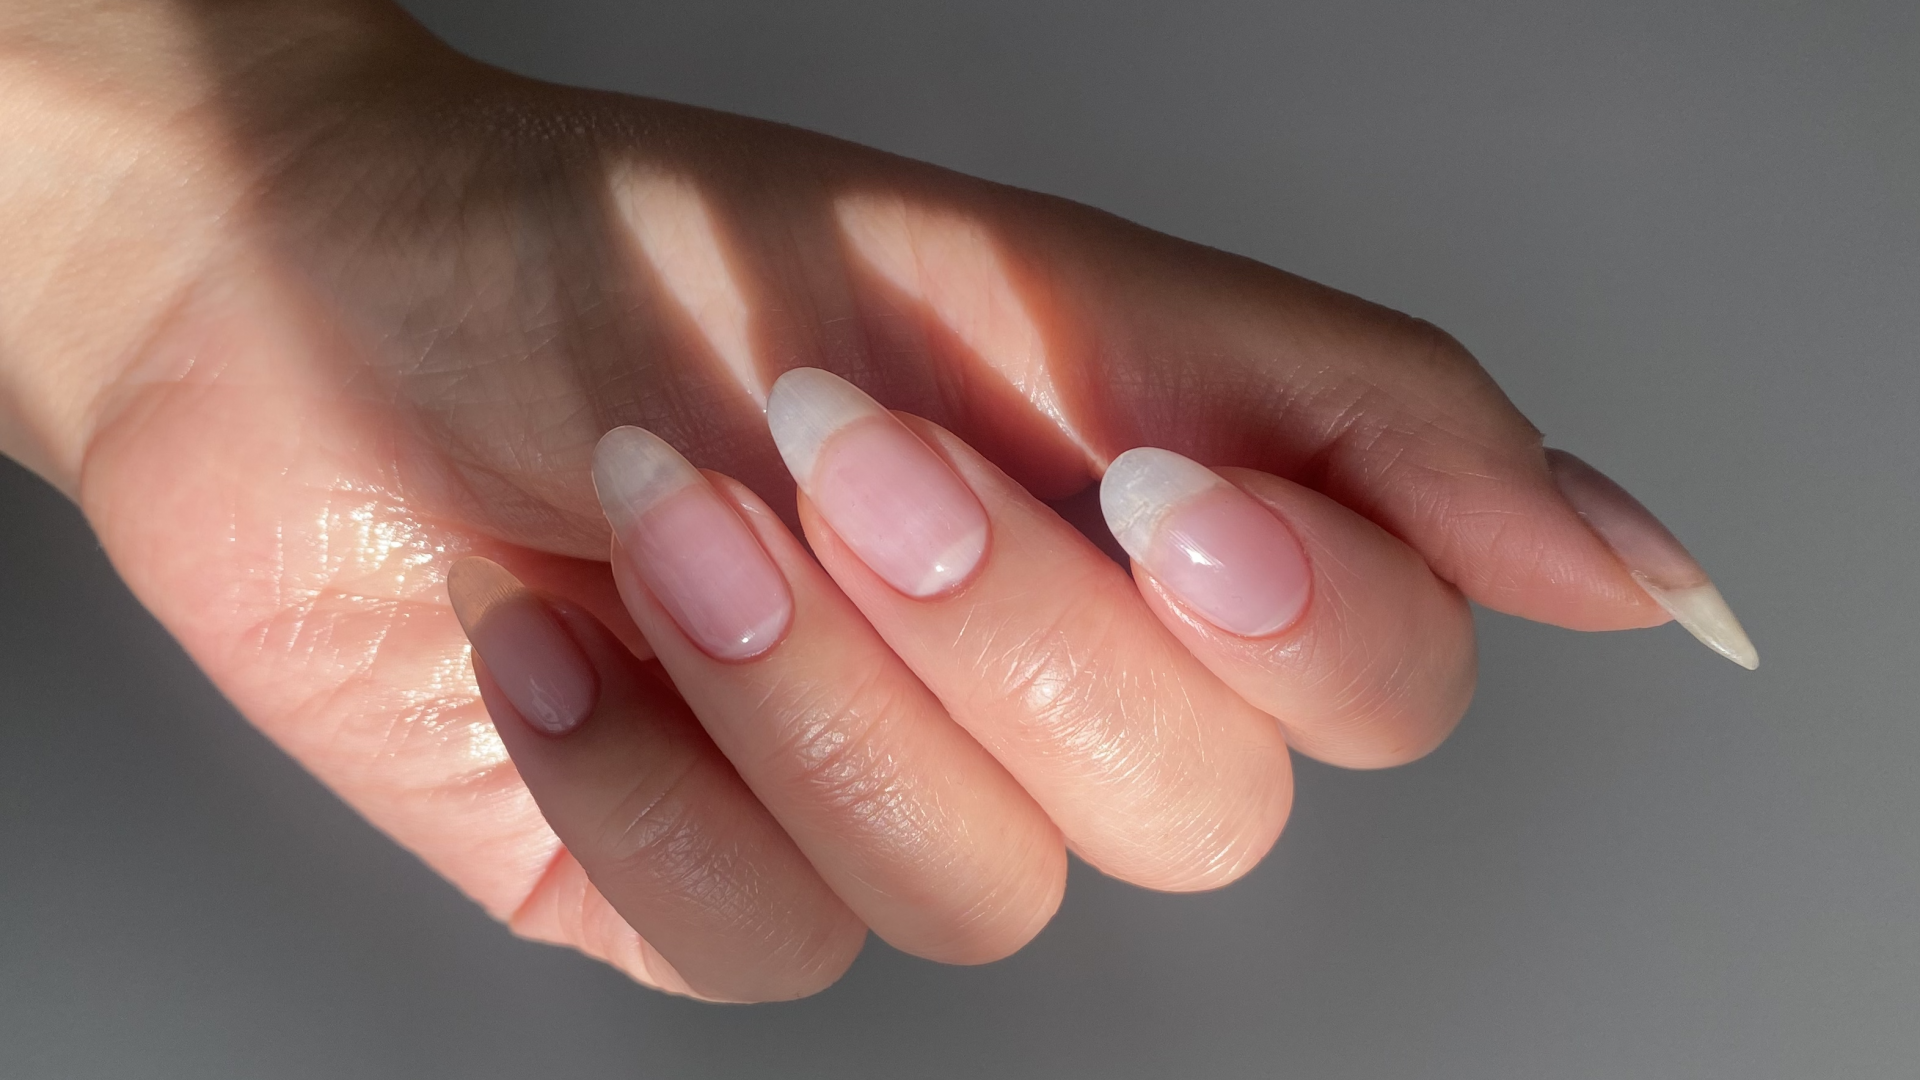 NAILCARE: CND™ Gelish Manicure/Pedicure Aftercare in London - Nails by Mets